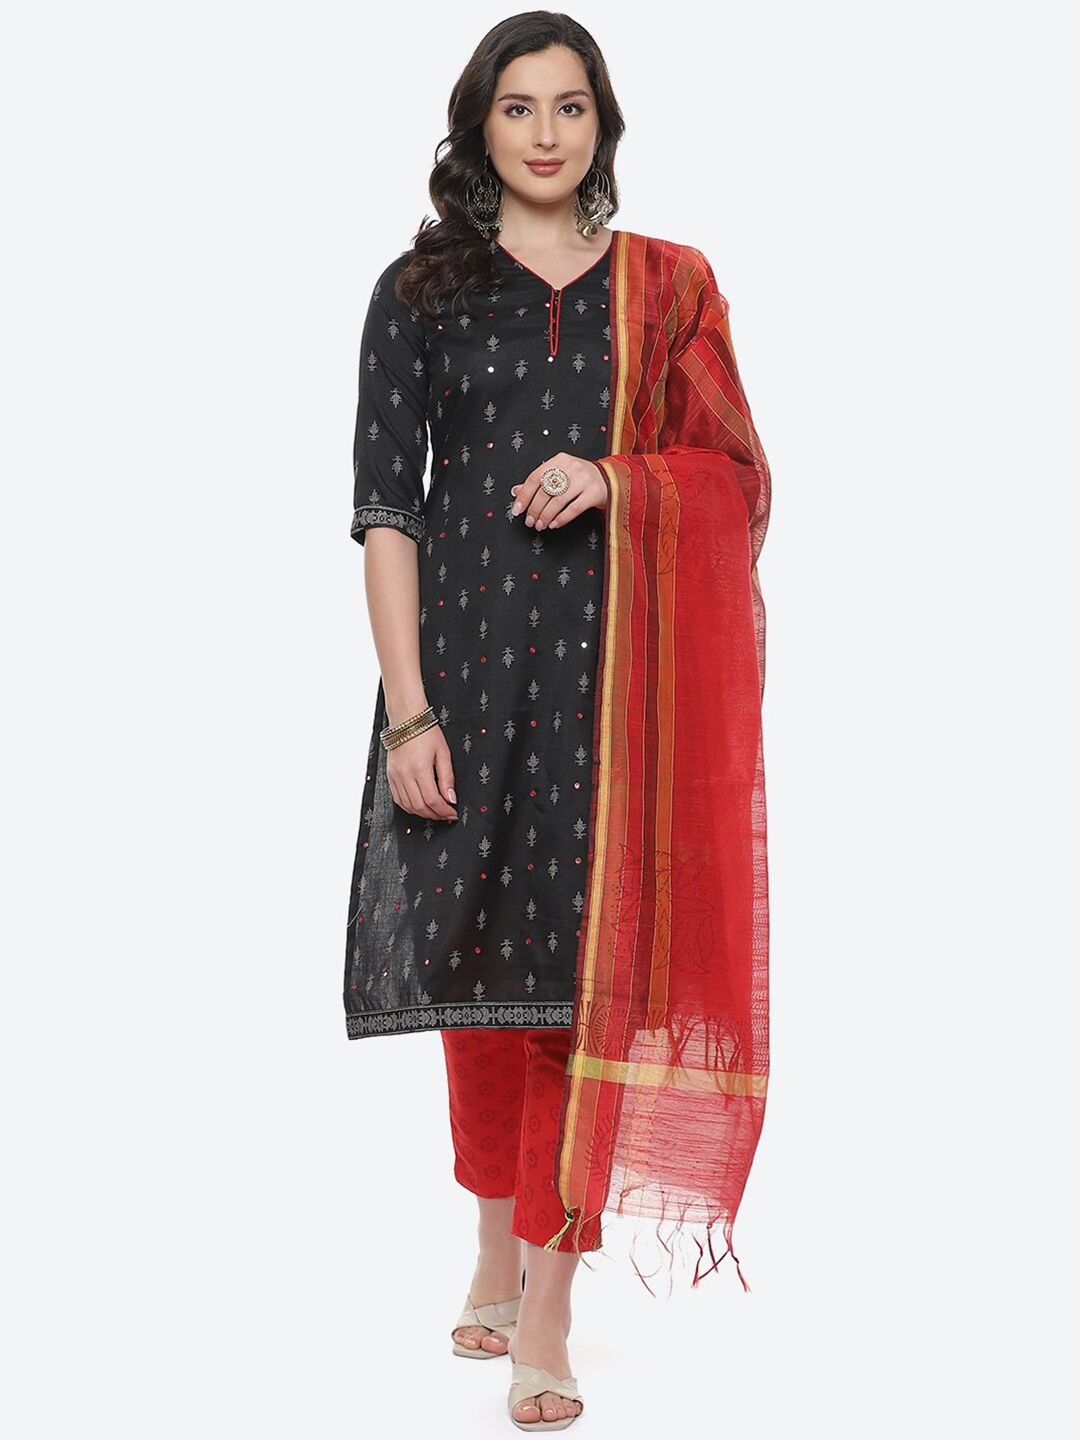 Biba Black & Red Printed Cotton Unstitched Dress Material Price in India